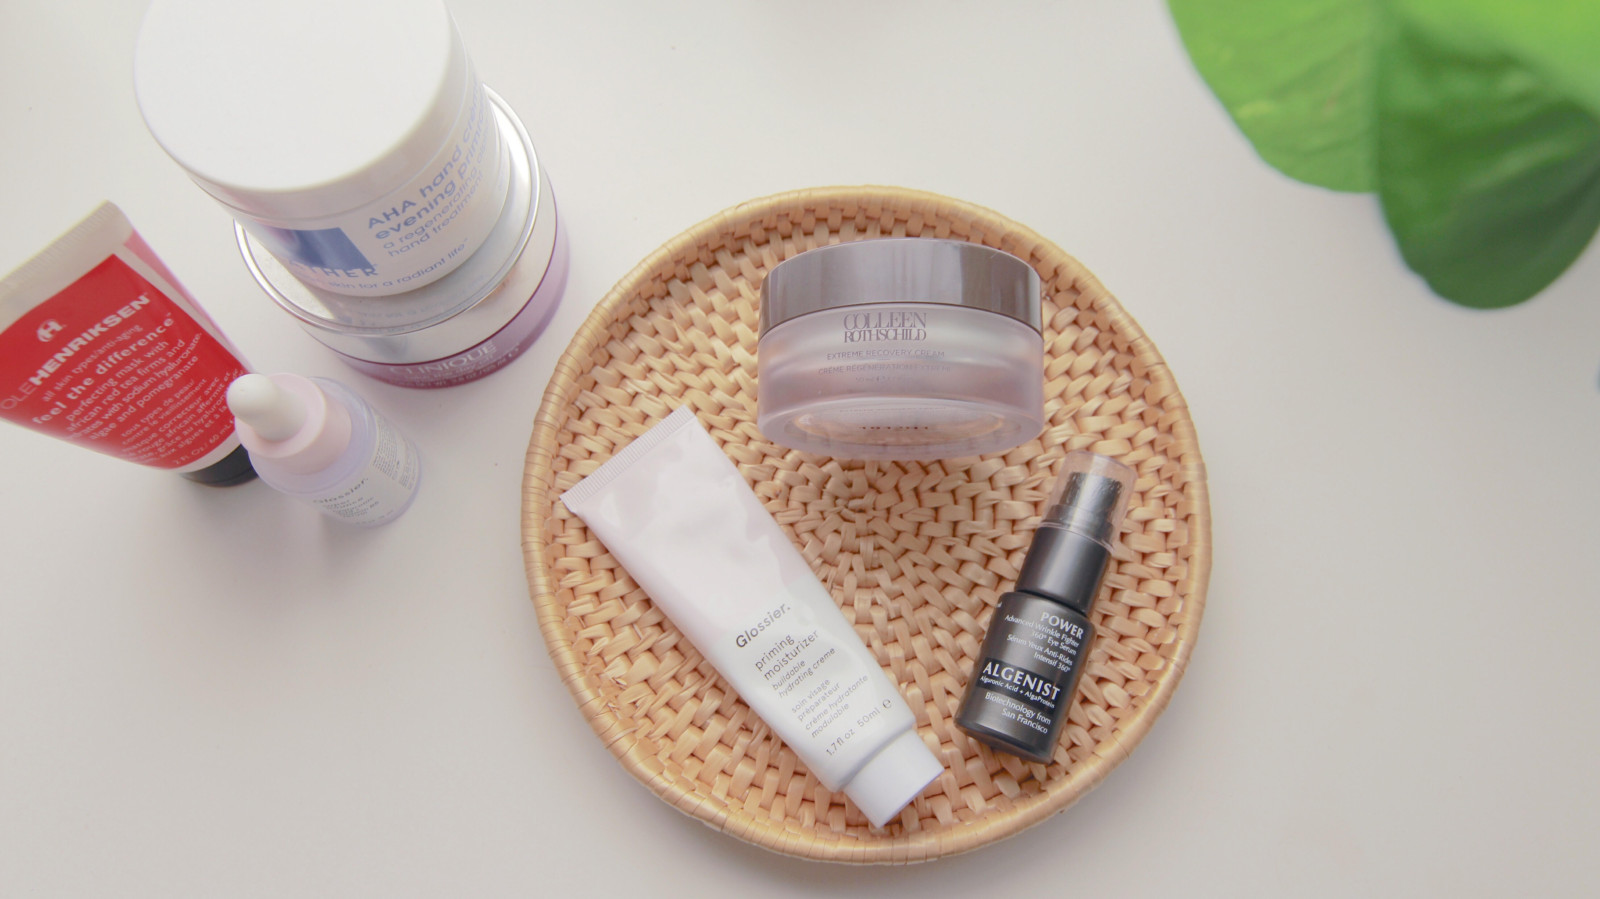 BEAUTY CORNER: MUST TRY SKIN CARE PRODUCTS!